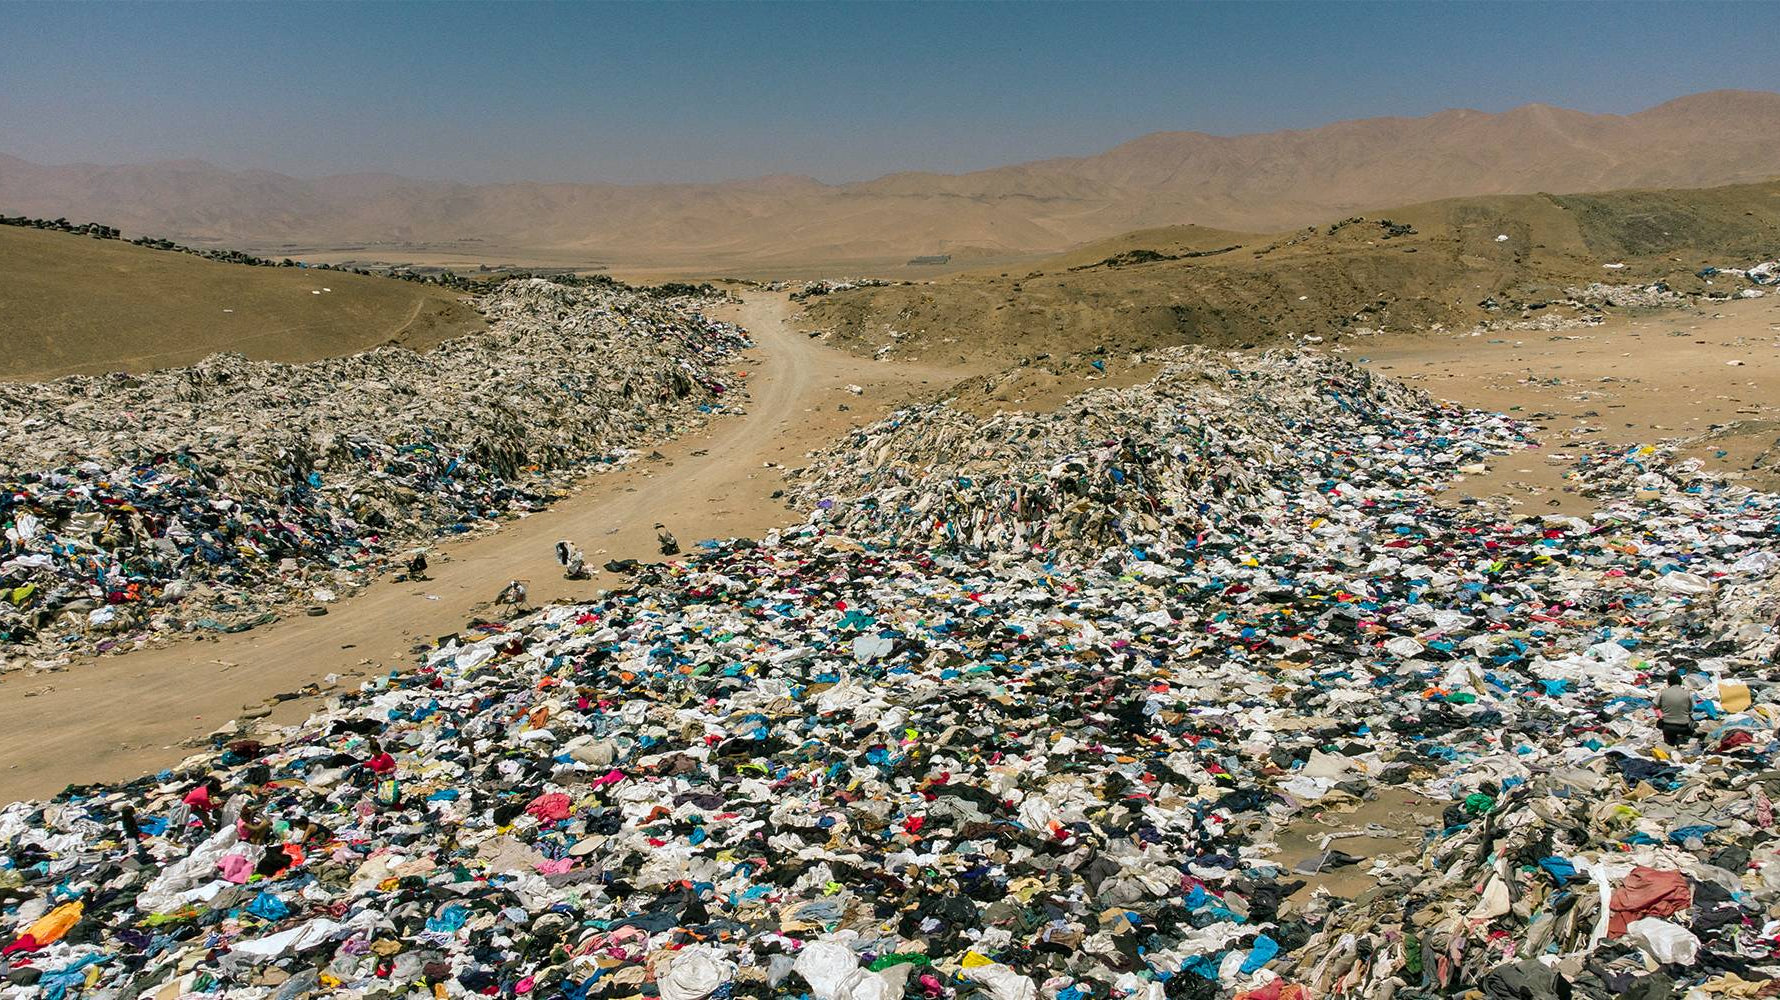 Every second, a truckload of clothes are destroyed. How do we prevent this happening?